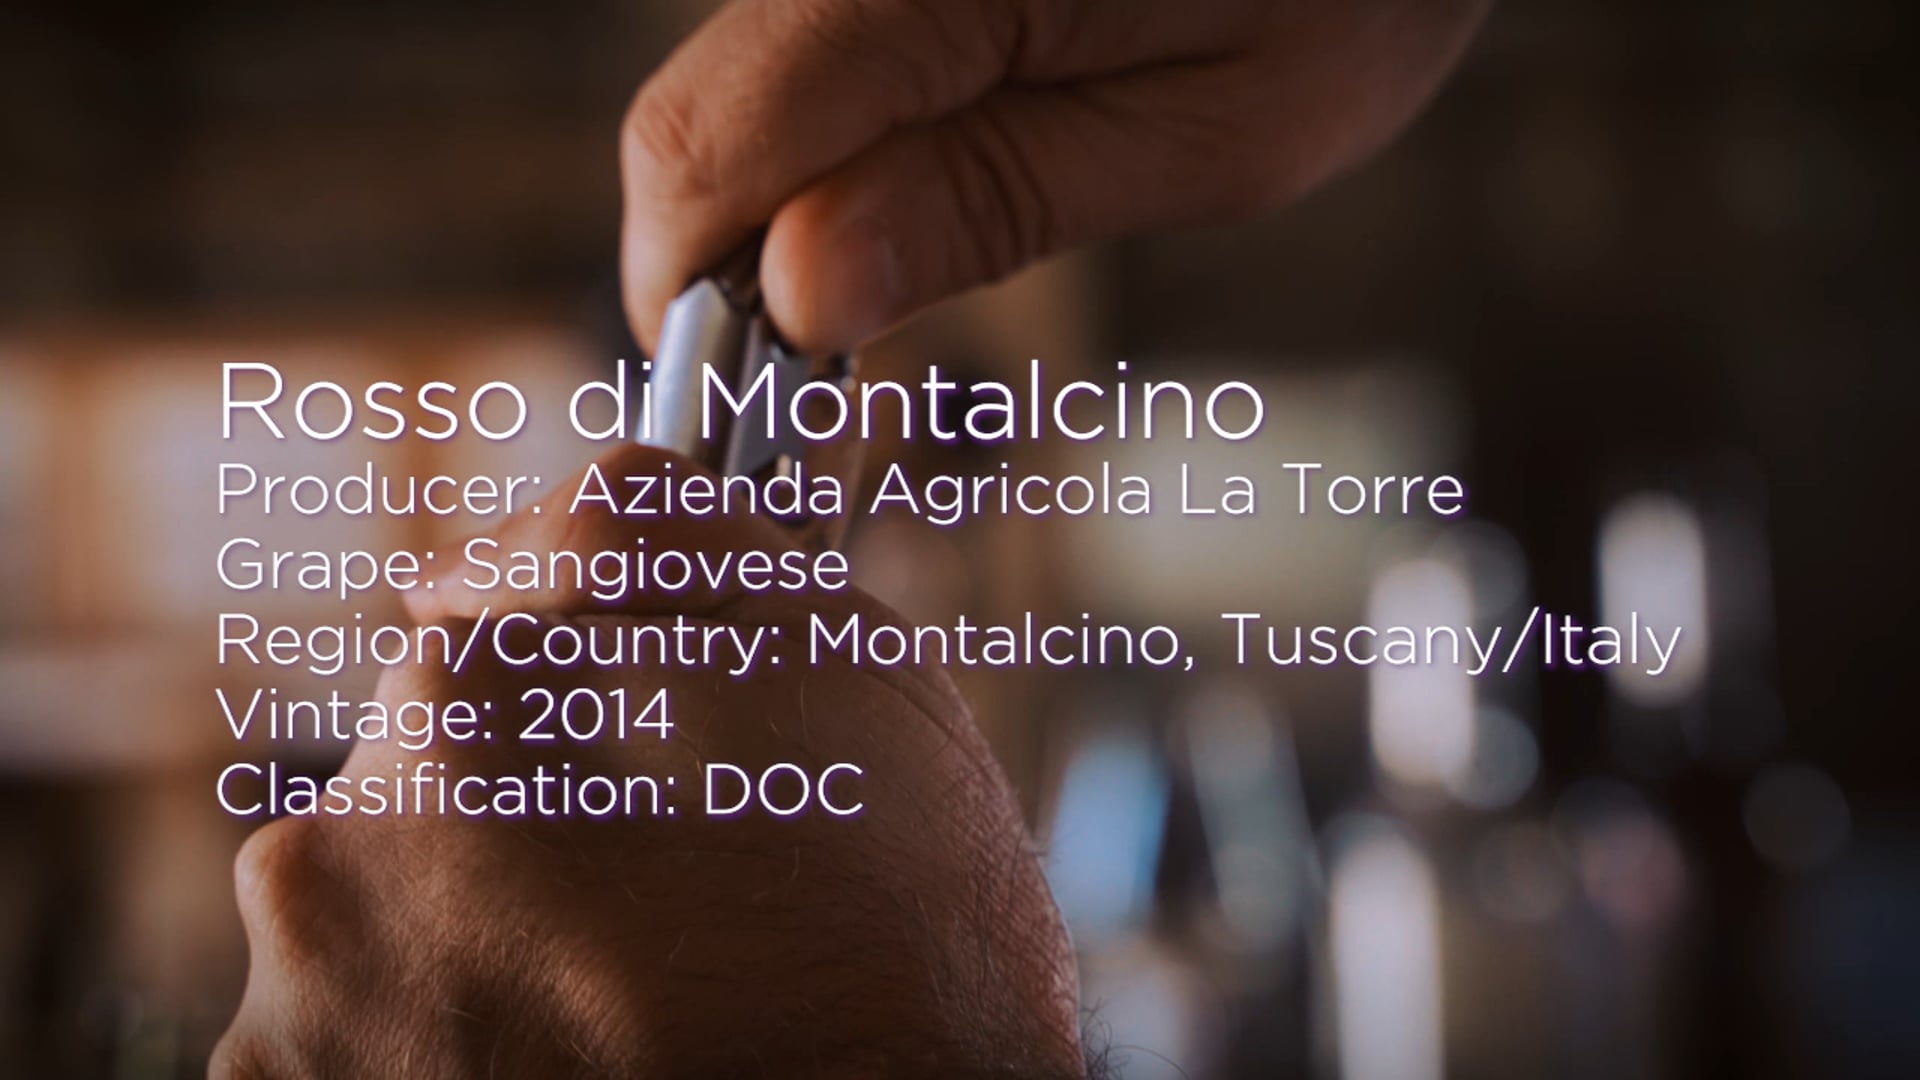 BEHIND THE LABEL: Rosso di Montalcino